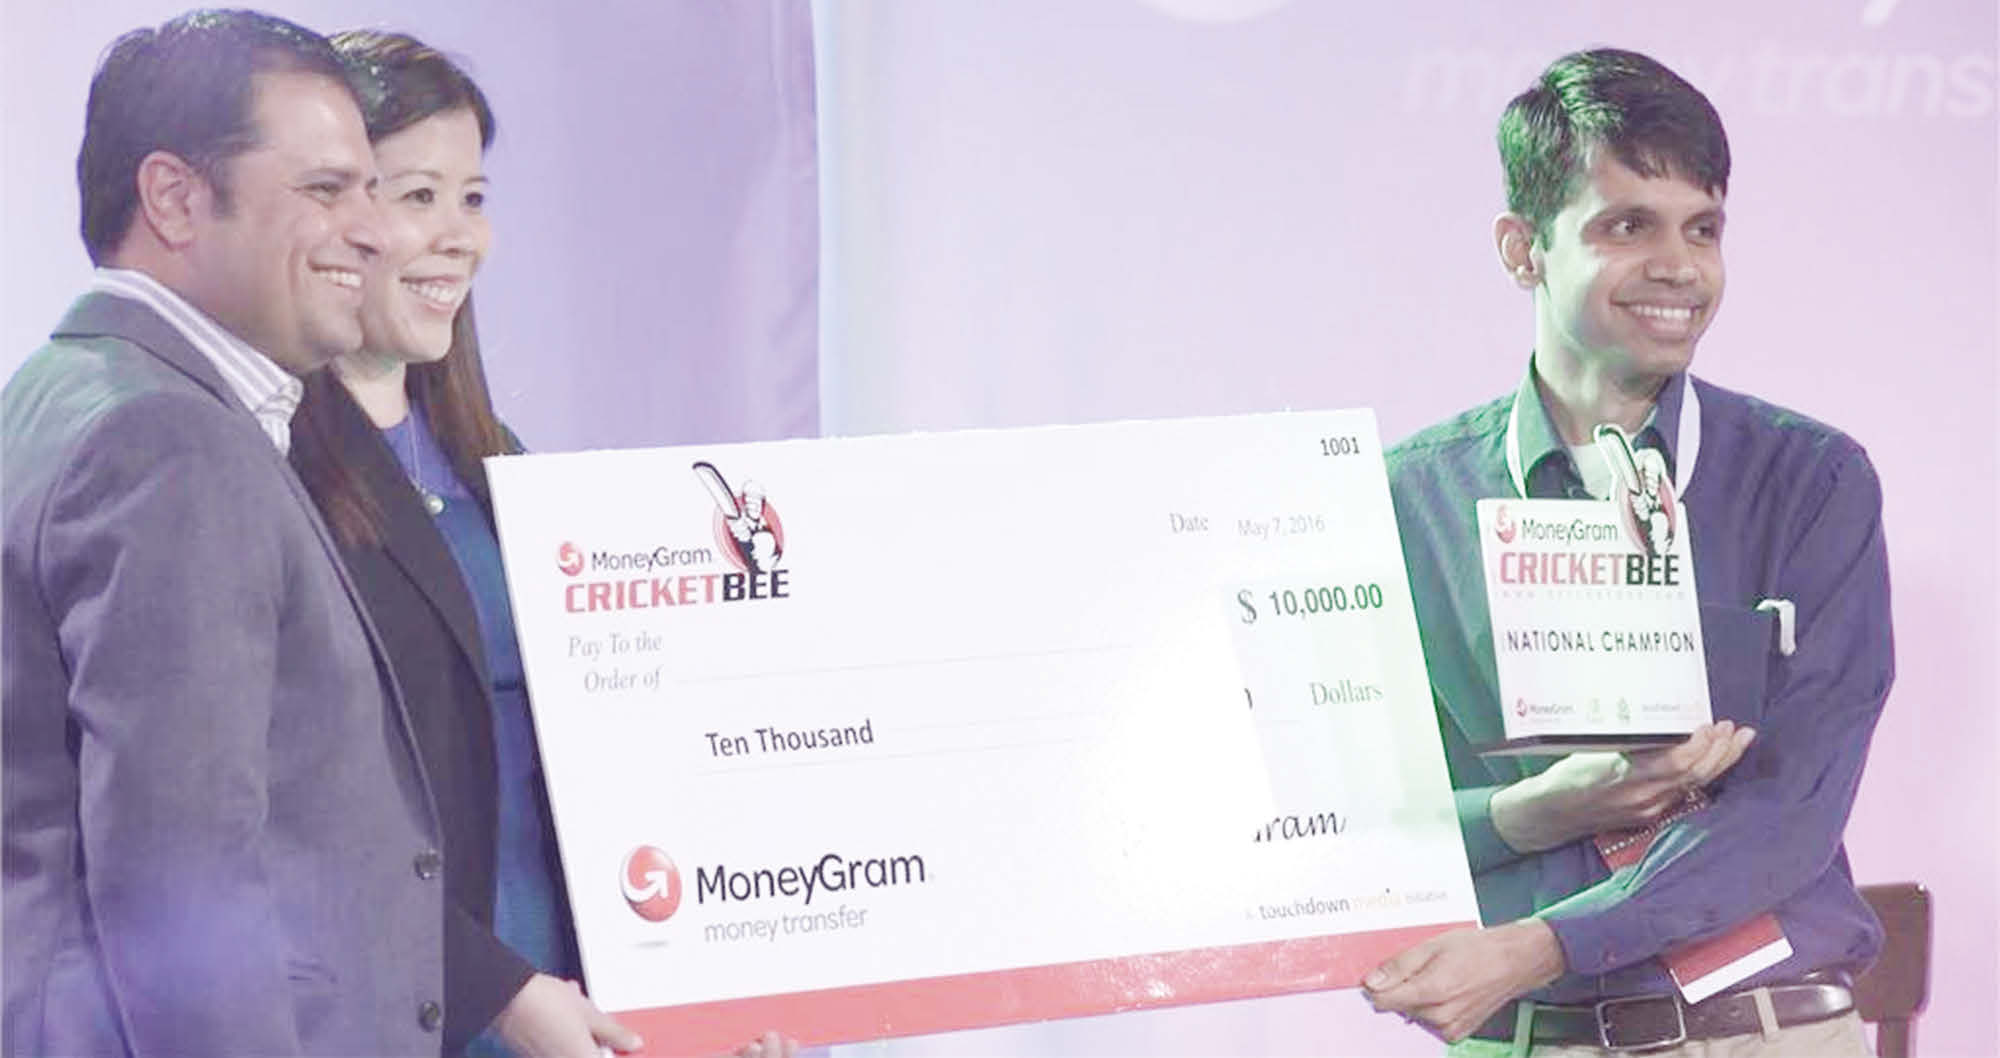 Bharat Jayakumar of Sunnyvale, California bagged the title of Champion and $10,000 prize money. (Left to Right): Rahul Walia, founder of the MoneyGram Cricket Bee, Ivy Wisco, MoneyGram, Bharat Jayakumar, National Champion of the MoneyGram CricketBee